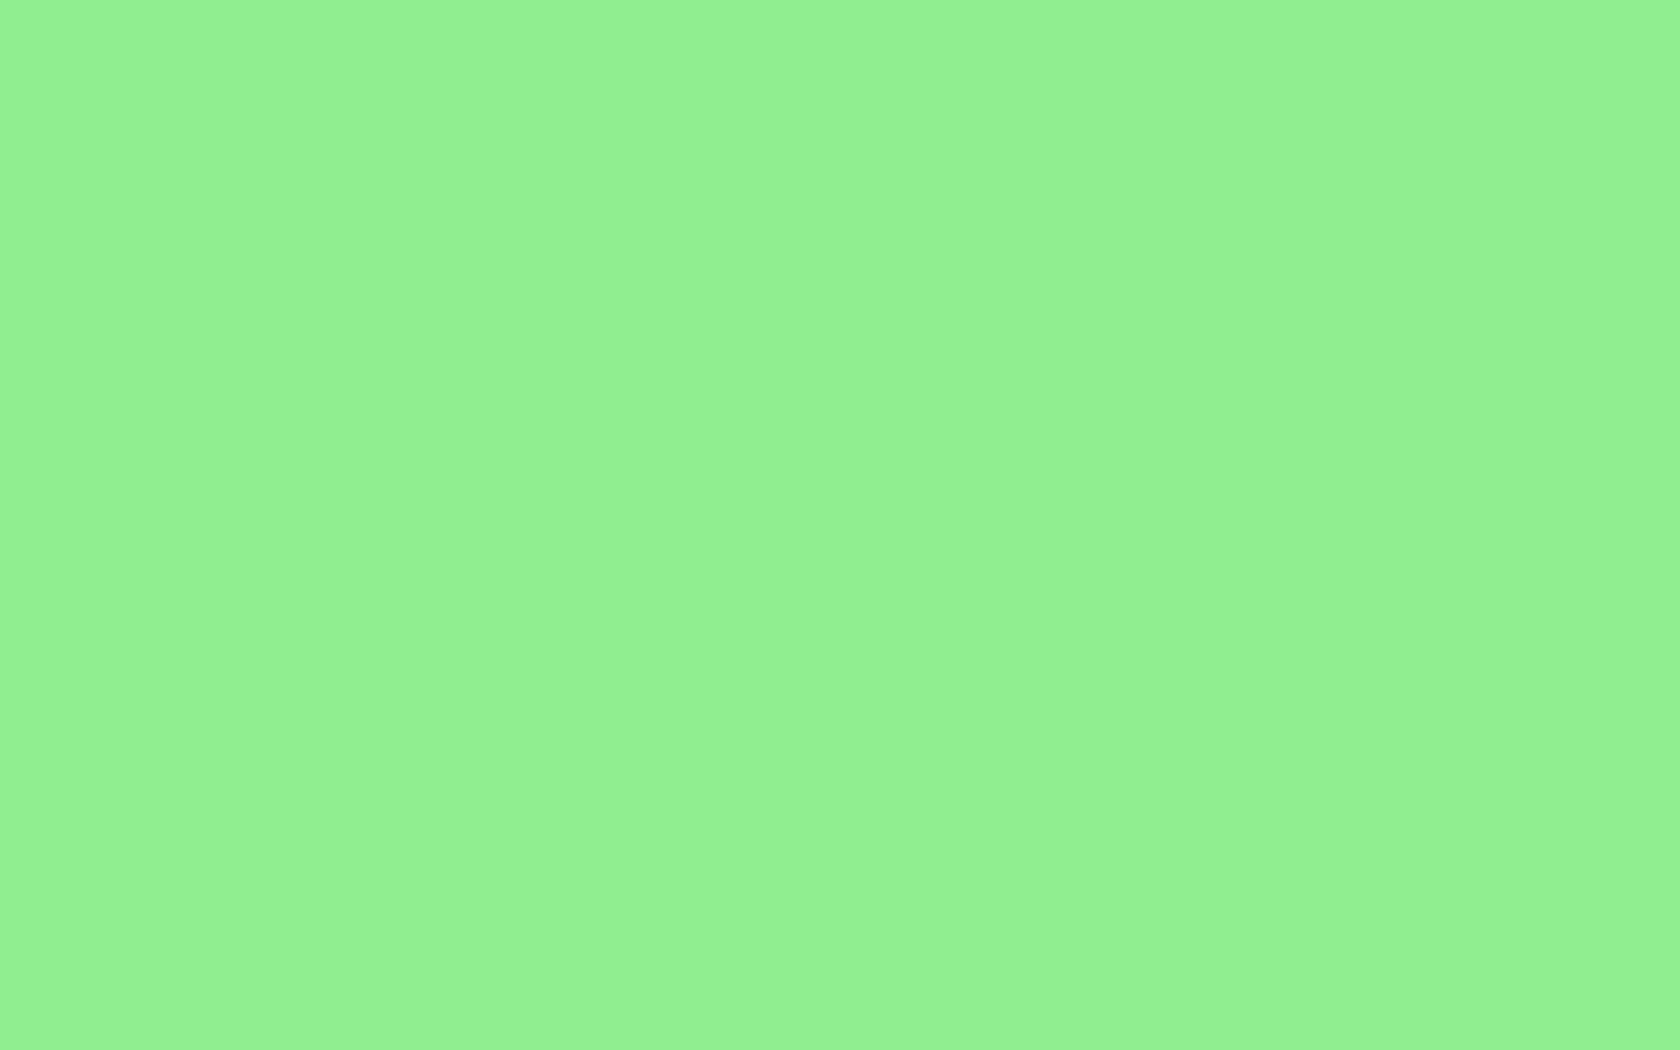 Light Green Solid Colour Wallpaper Pictures To Pin